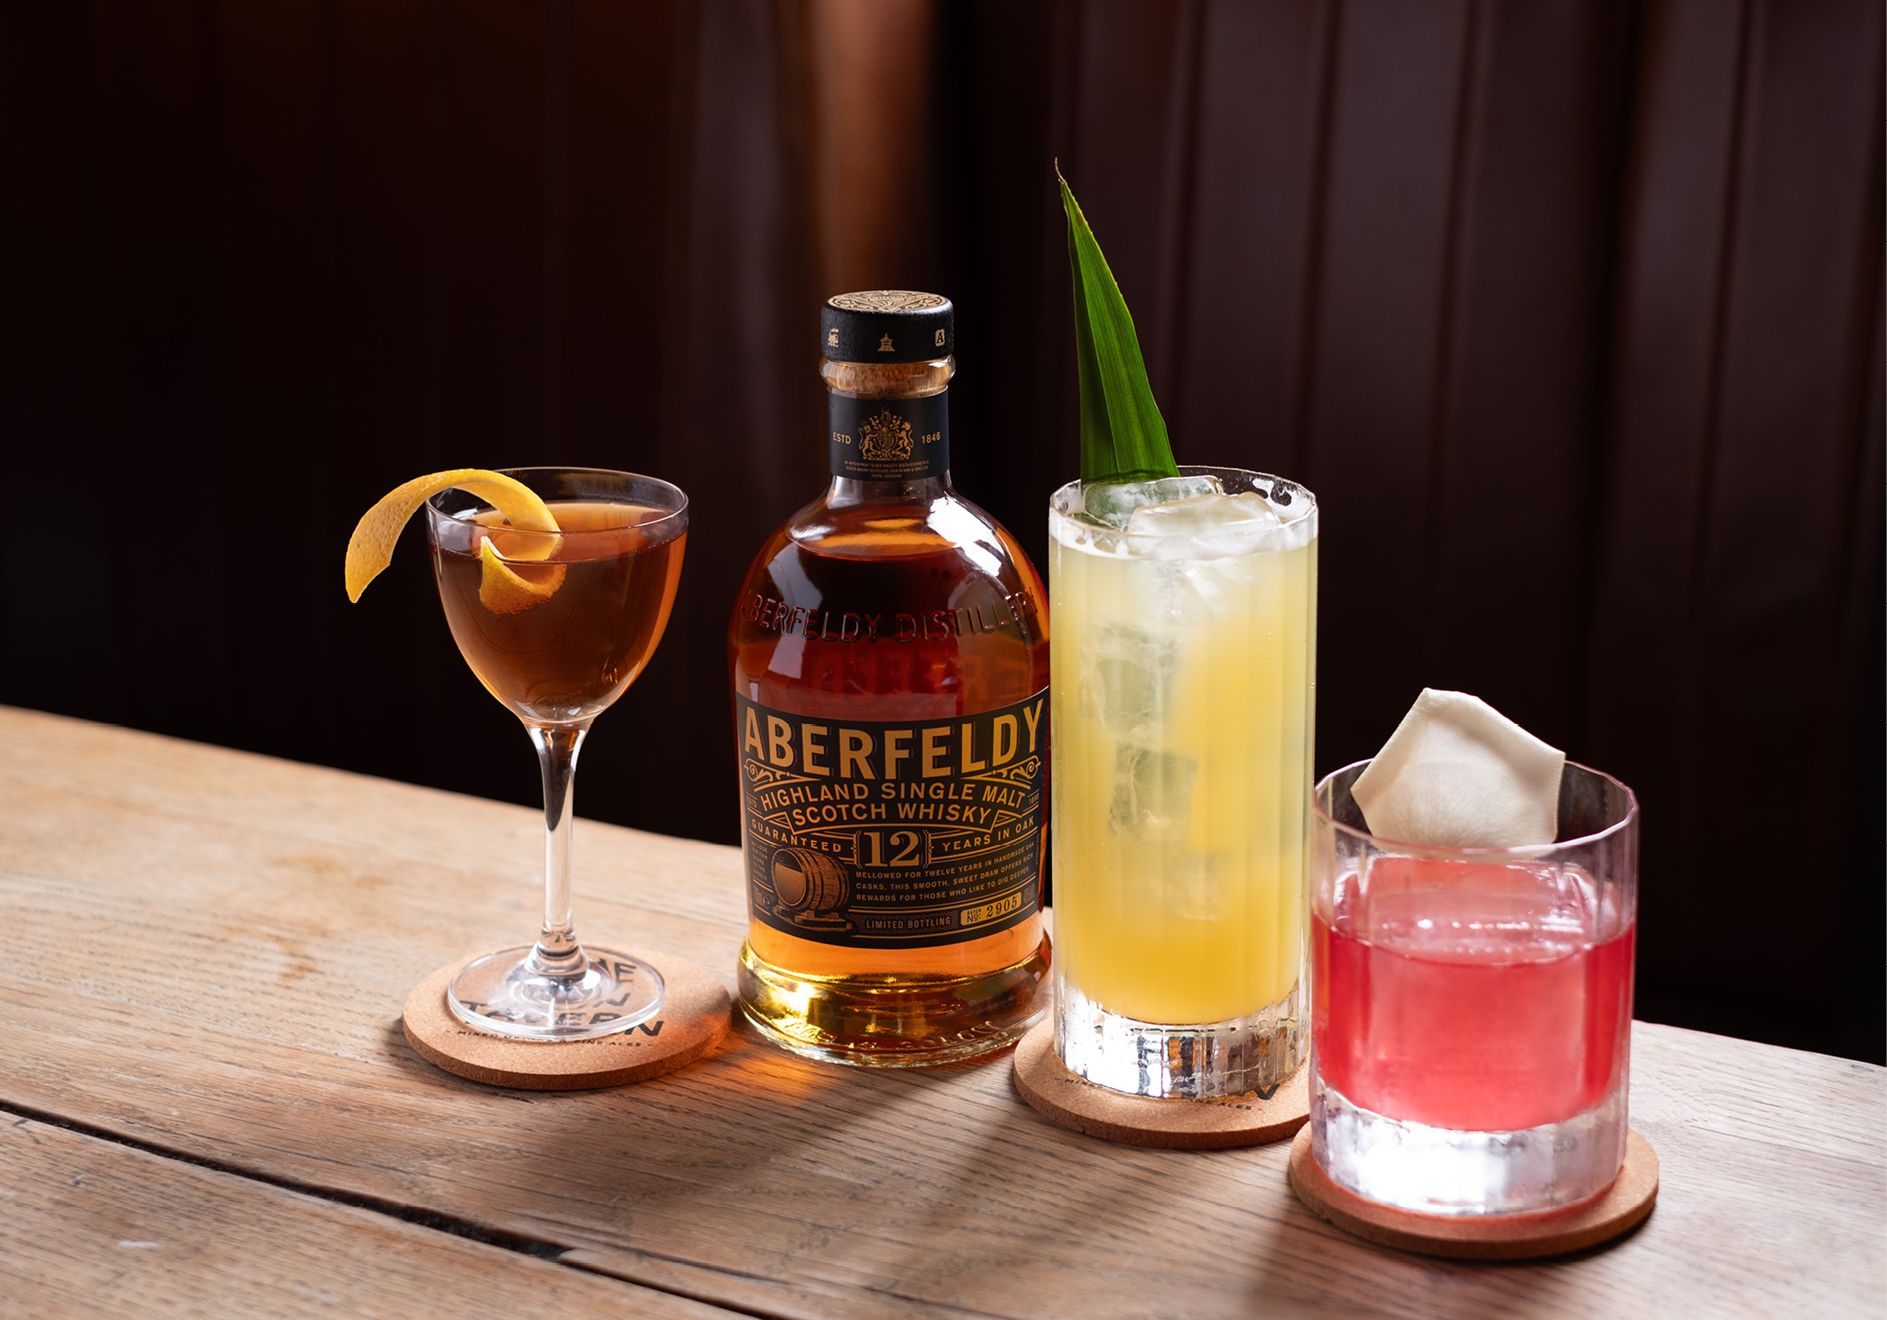 Aberfeldy is the whisky partner at Bethnal Green's The Sun Tavern